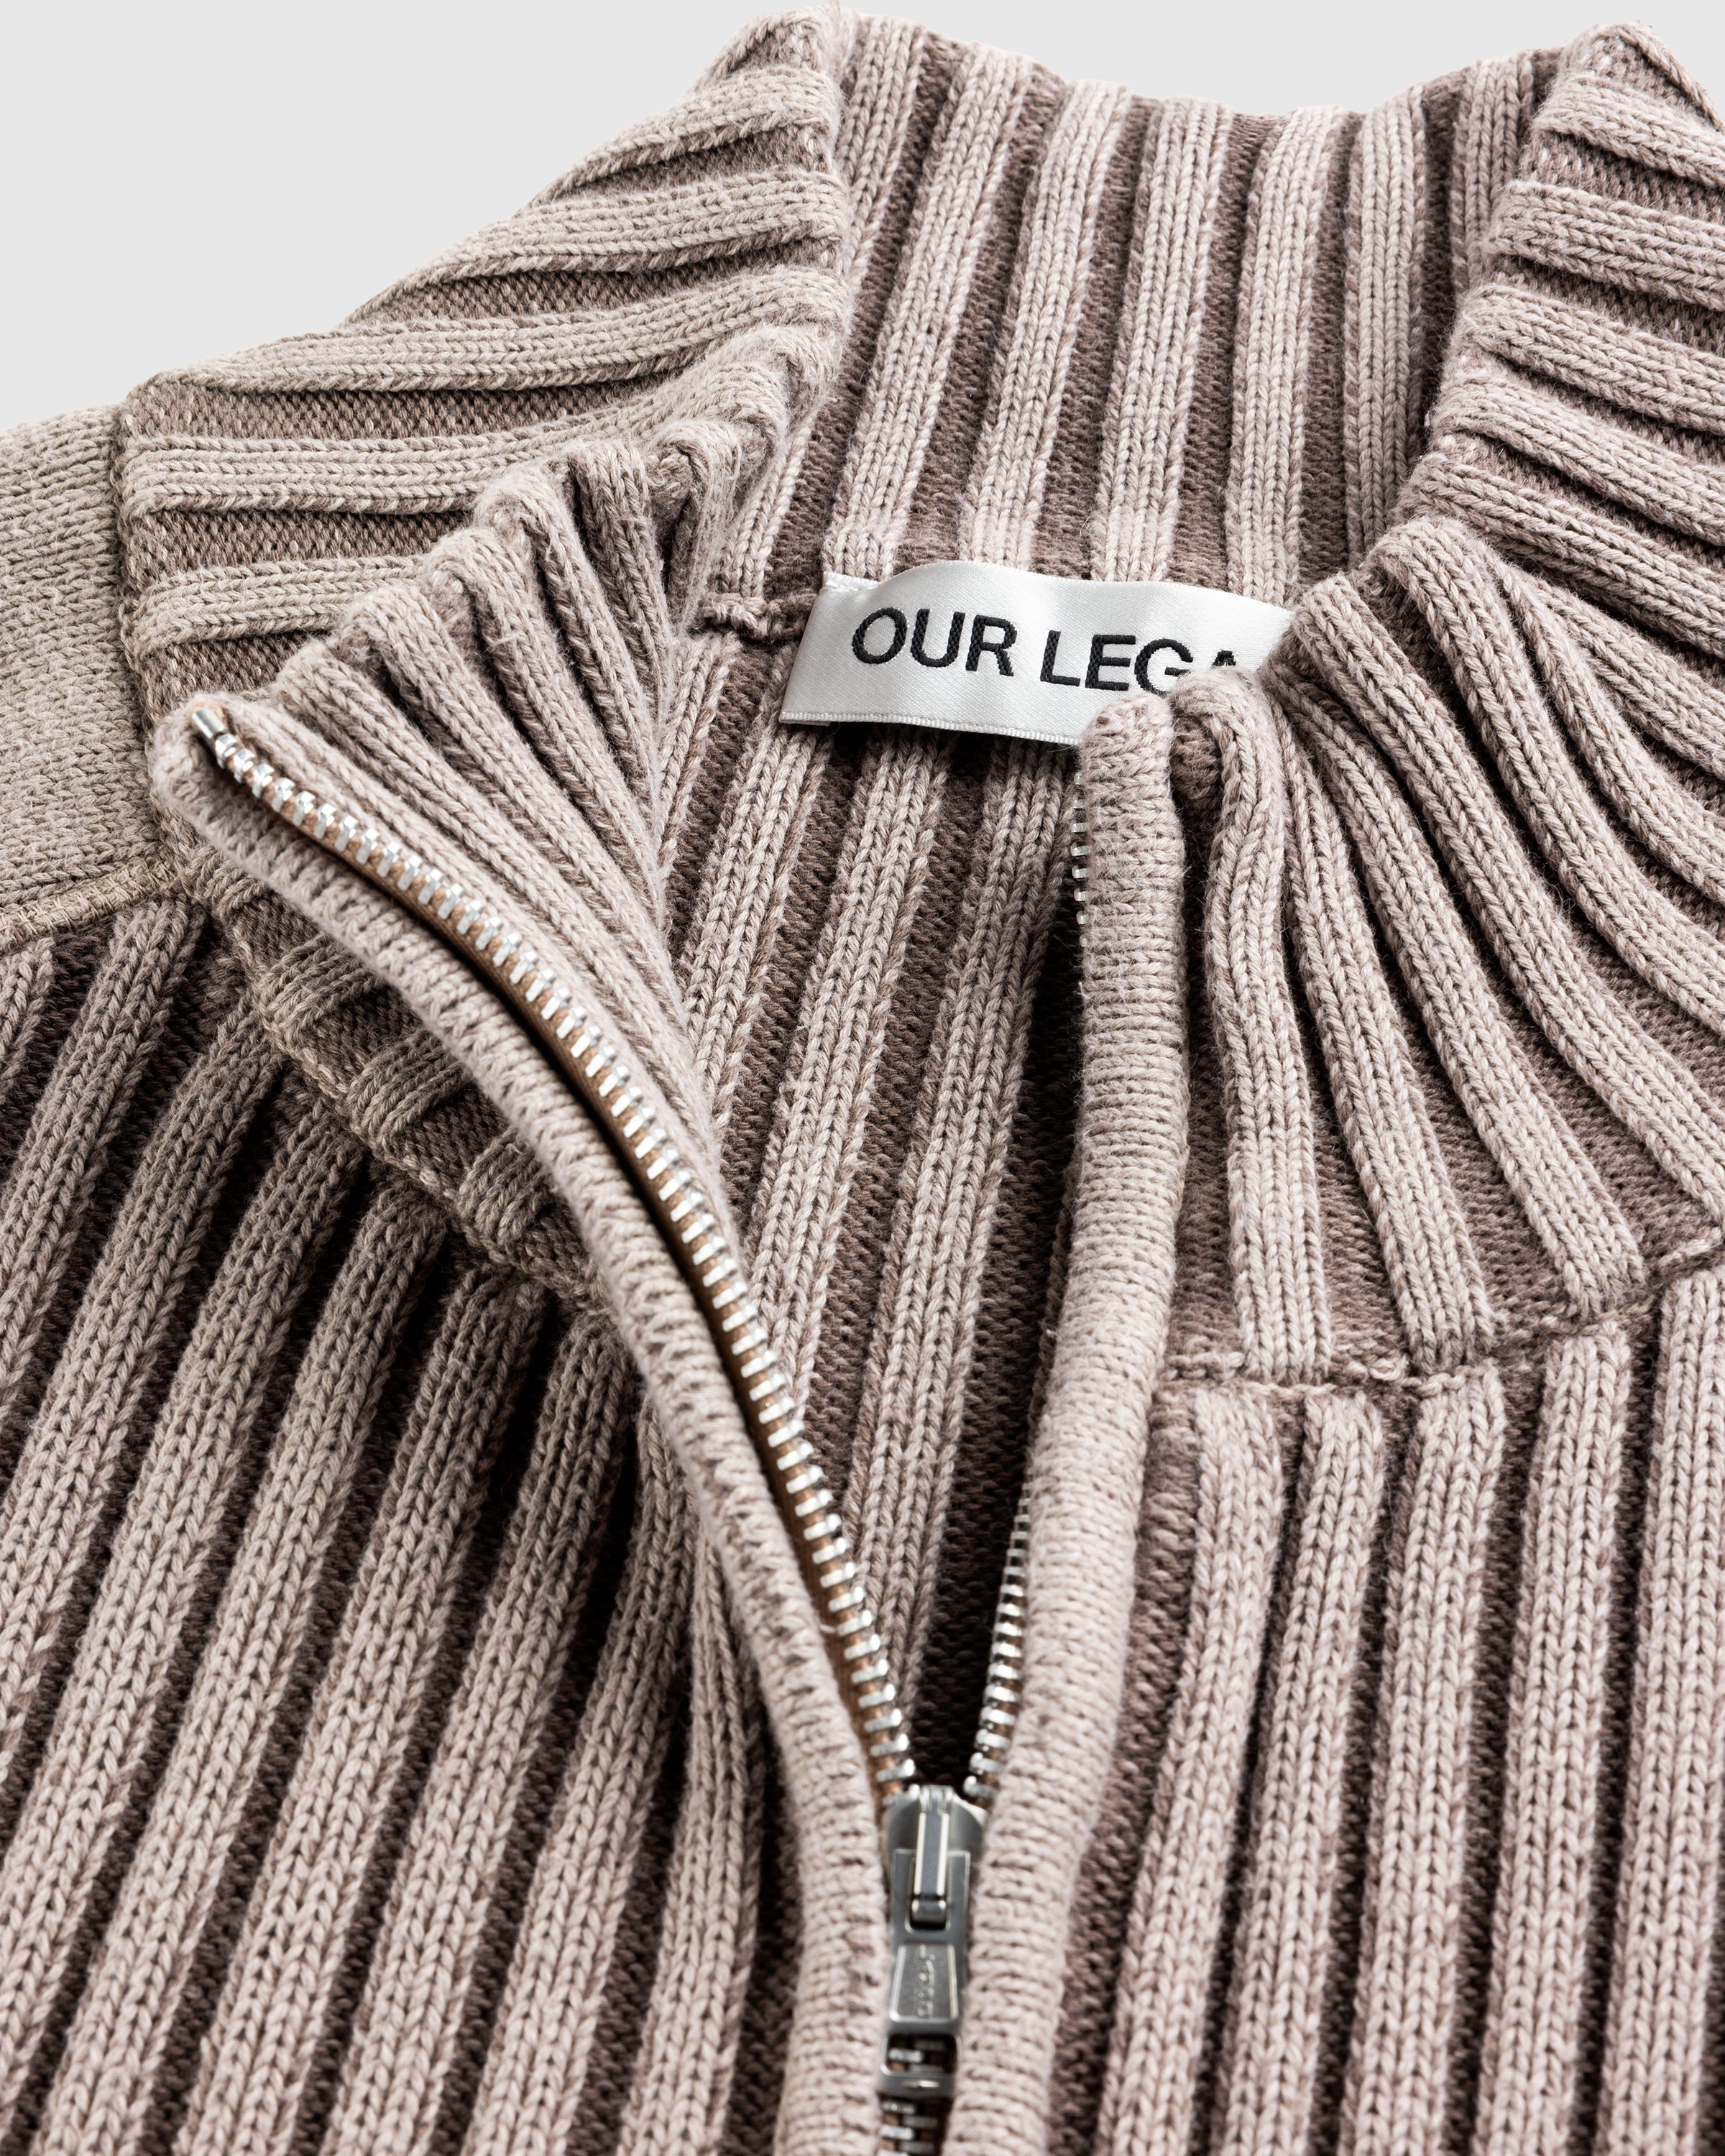 Our Legacy - Classic Zip Cardigan Pink Cast Cotton Cash - Clothing - Pink - Image 6